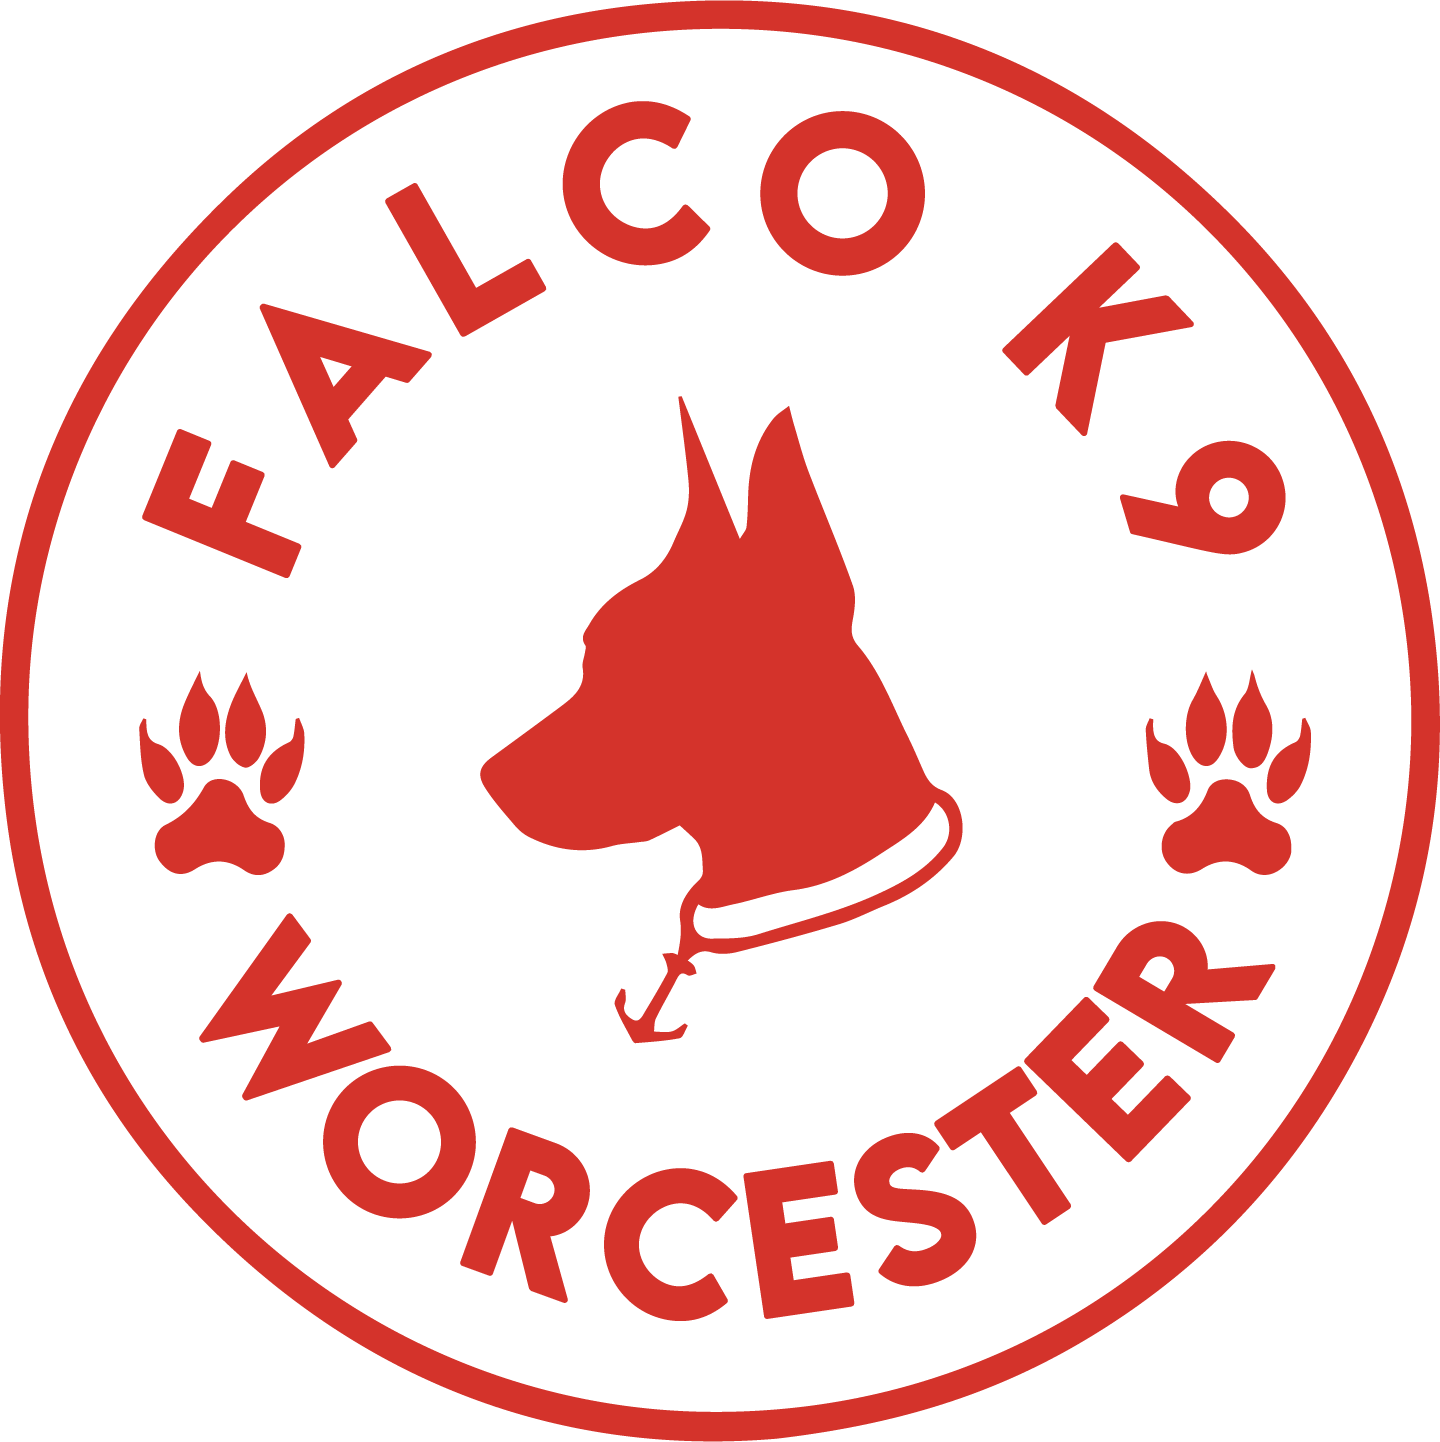 Falco K9 Worcester